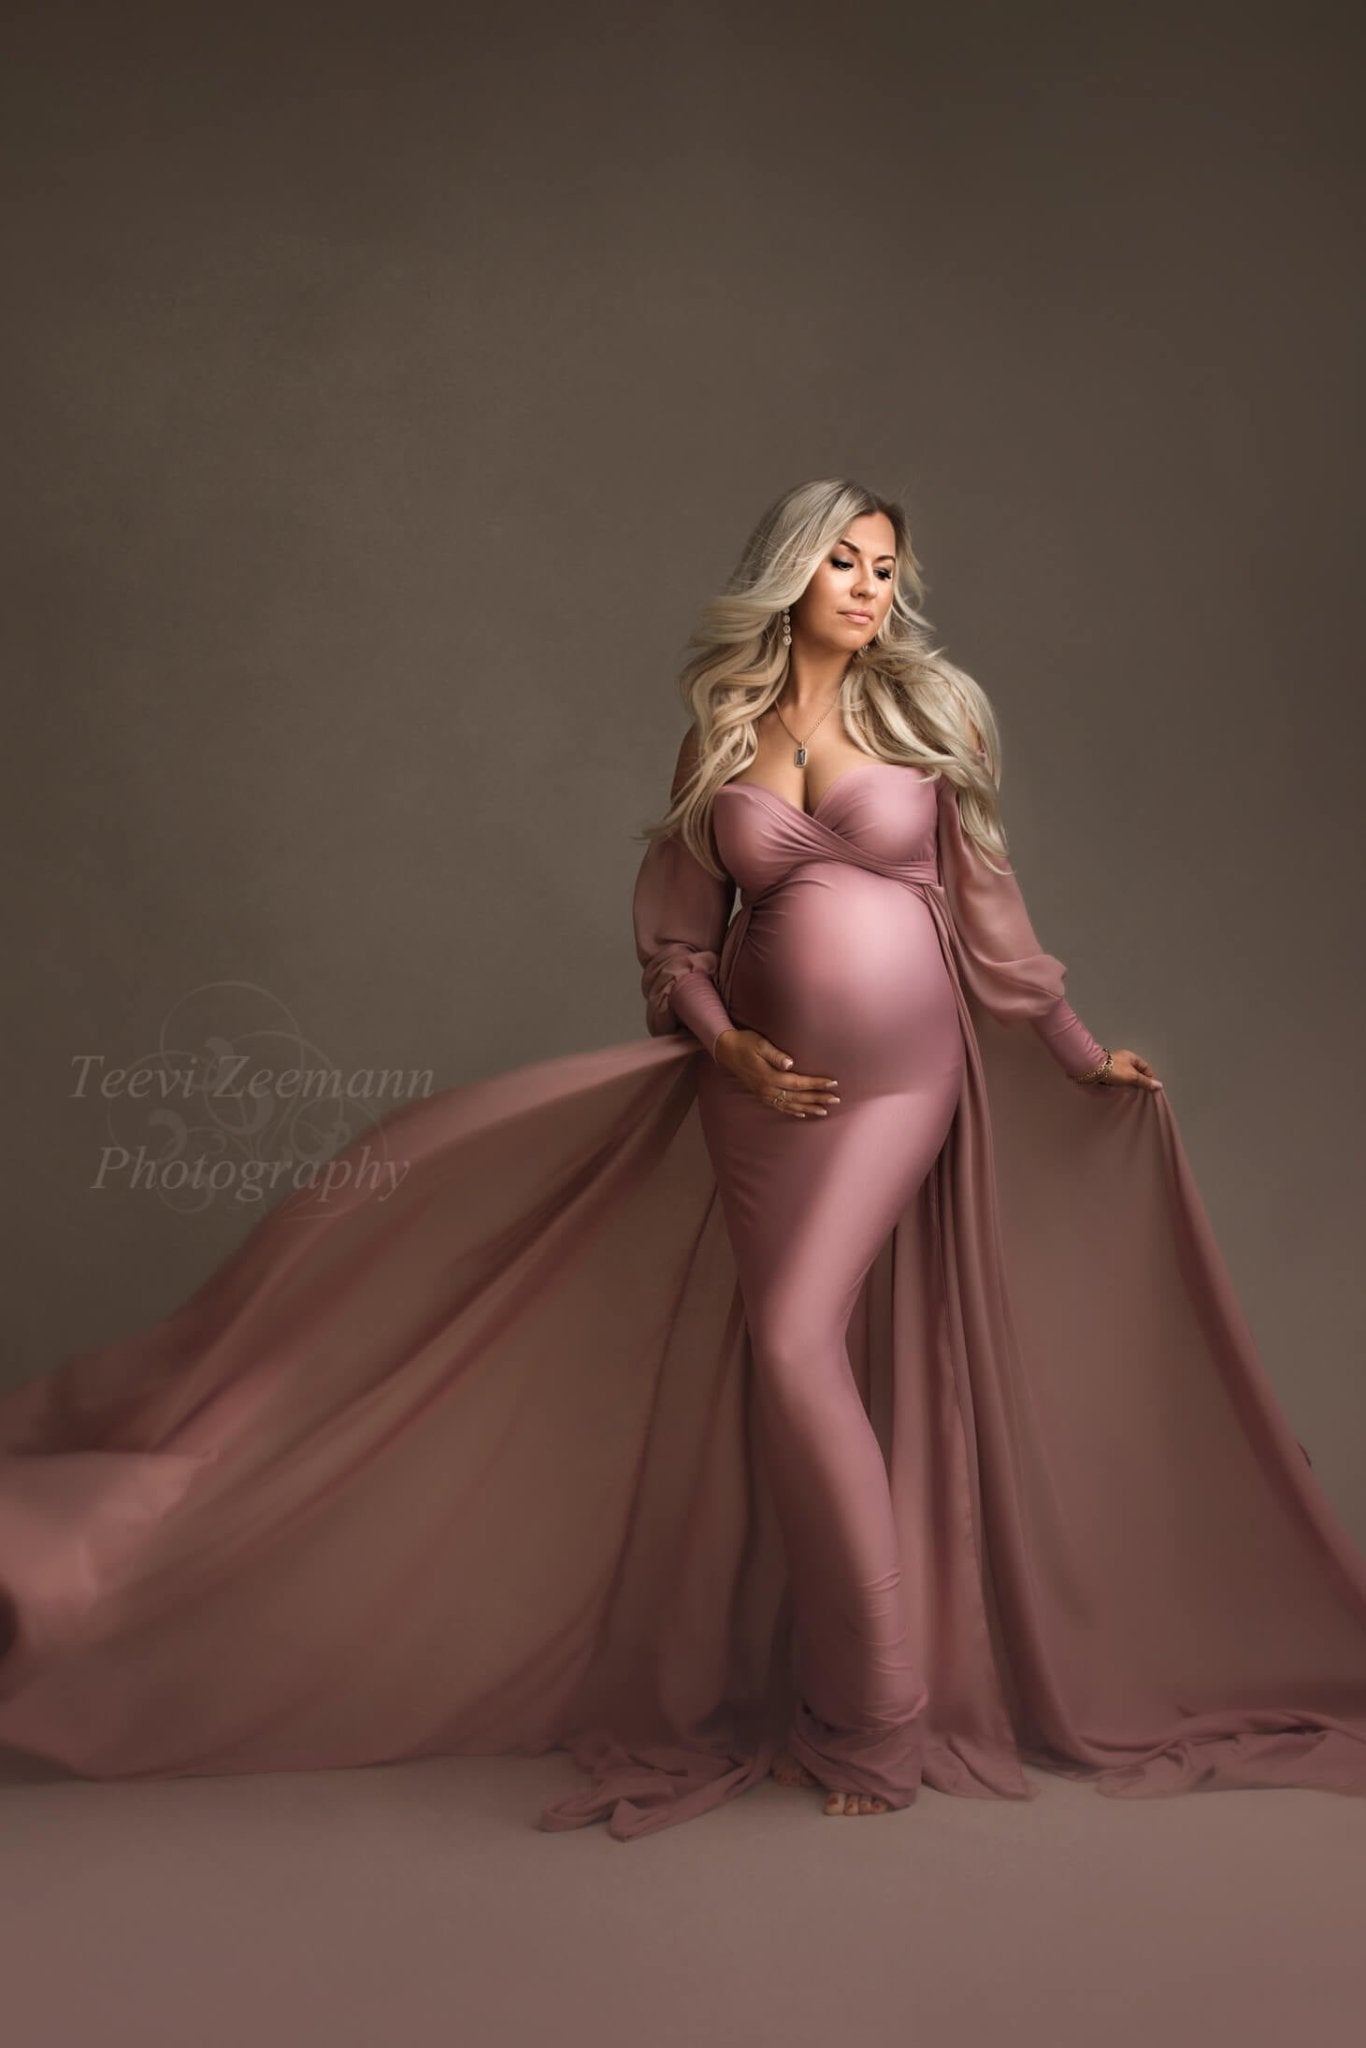 Blond pregnant model poses in a studio during a maternity photoshoot. She looks down with her eyes partially closed. She wears an old pink long dress designed by mii-estilo. The dress features a tight underdress with long chiffon train. The top has a sweetheart neckline and long bell sleeves. The model holds her bump with one hand while playing with the train with the other hand.